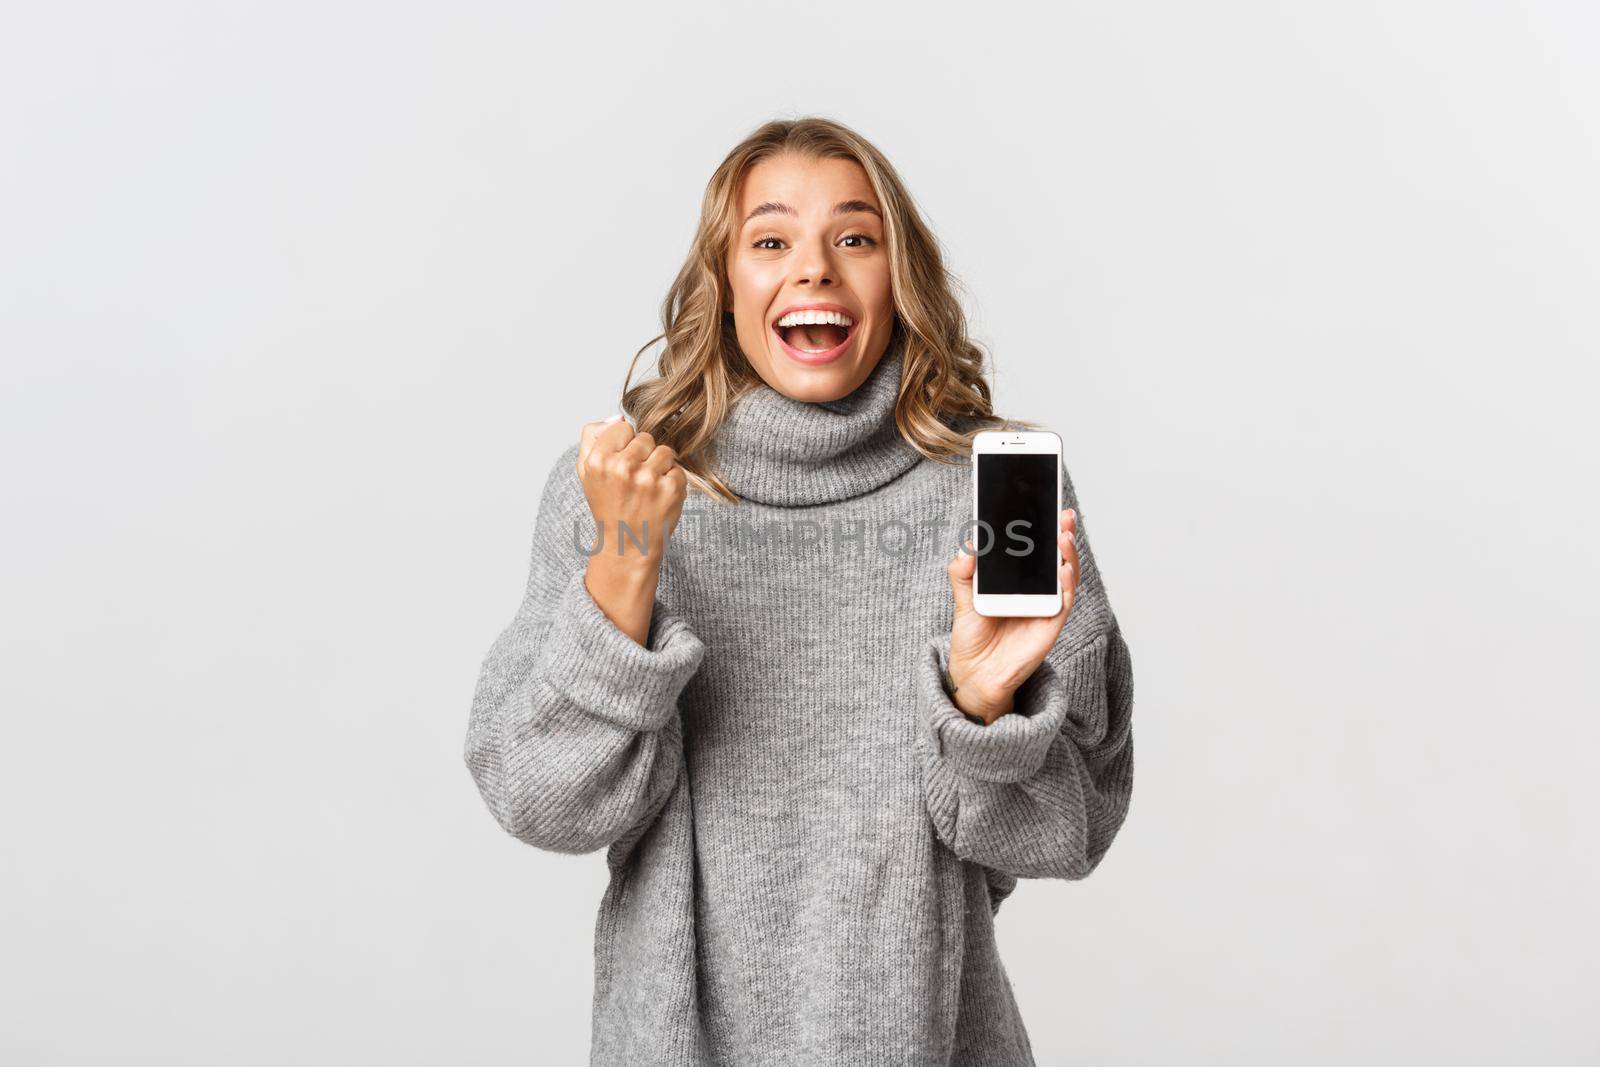 Image of winning happy blond girl, triumphing over online achievement, showing smartphone screen and making fist pump, white background.